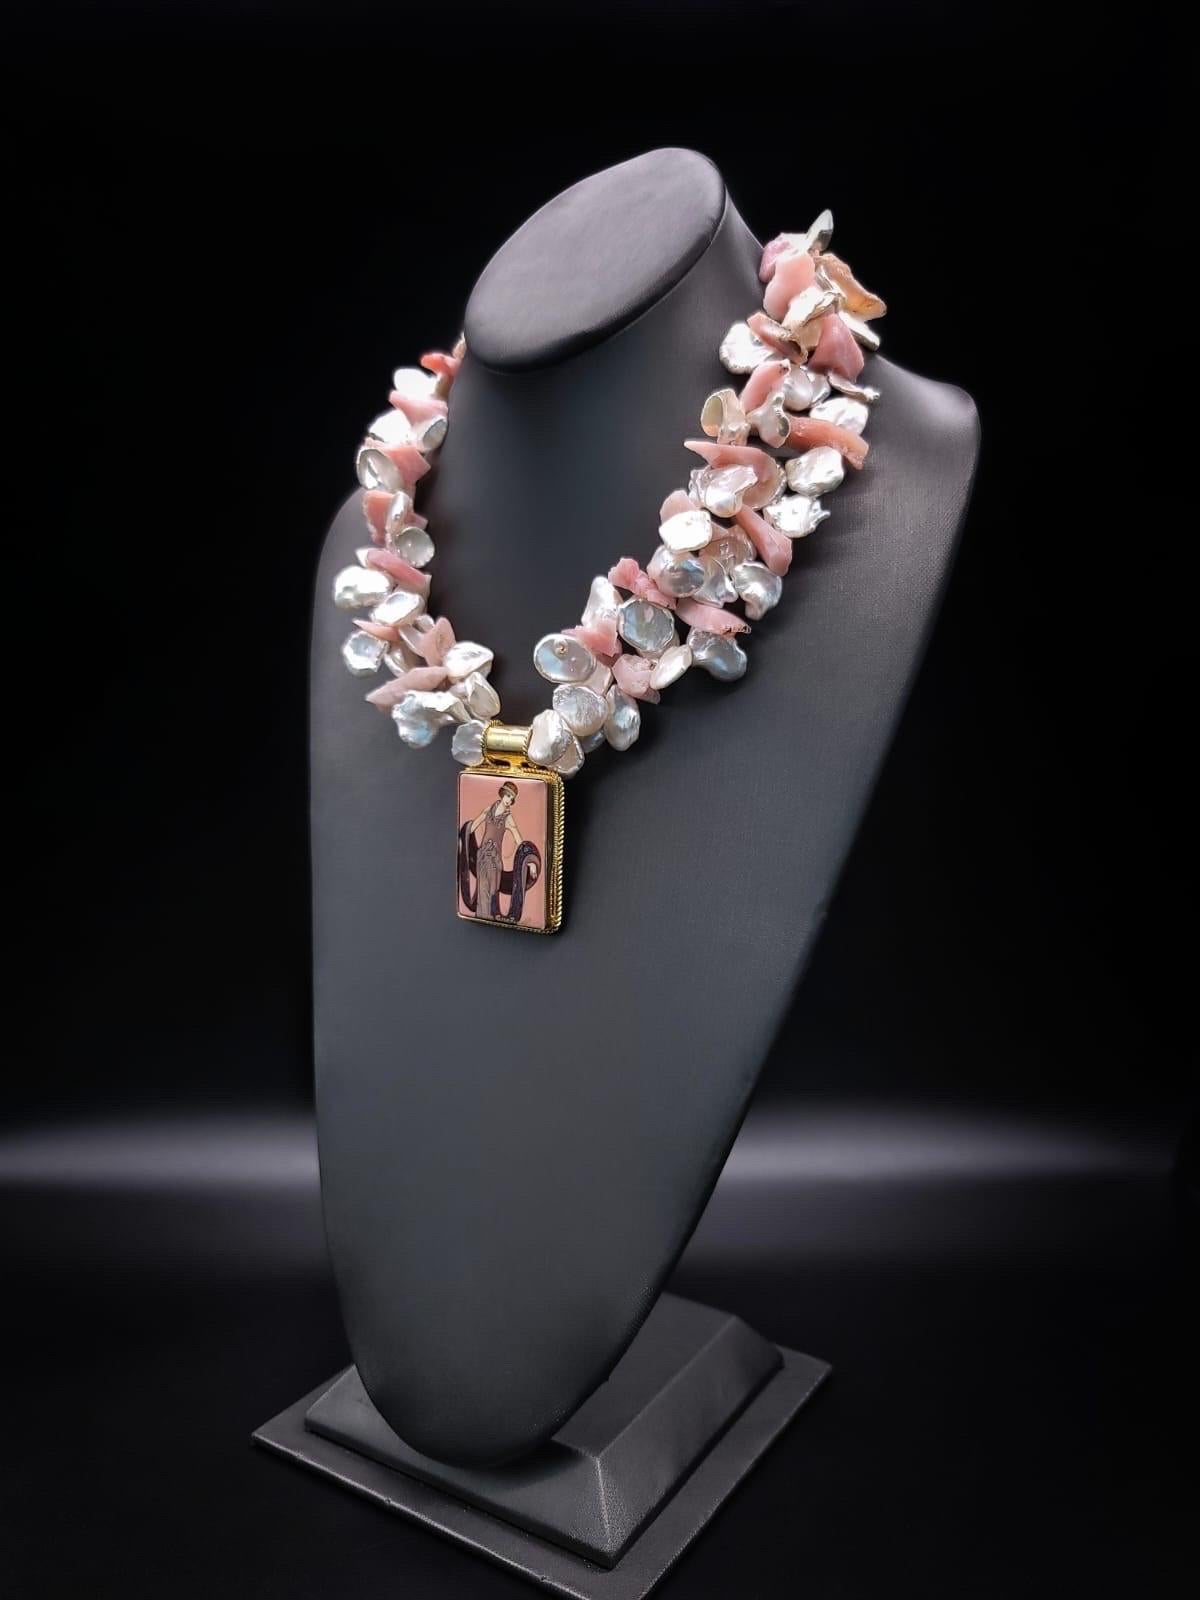 

Introducing our One-of-a-Kind Exquisite Necklace, A harmonious fusion of elegance and craftsmanship. This remarkable necklace boasts two strands of radiant Keshi Pearls with Pink Peruvian Opals, culminating in a masterpiece adorned with a unique